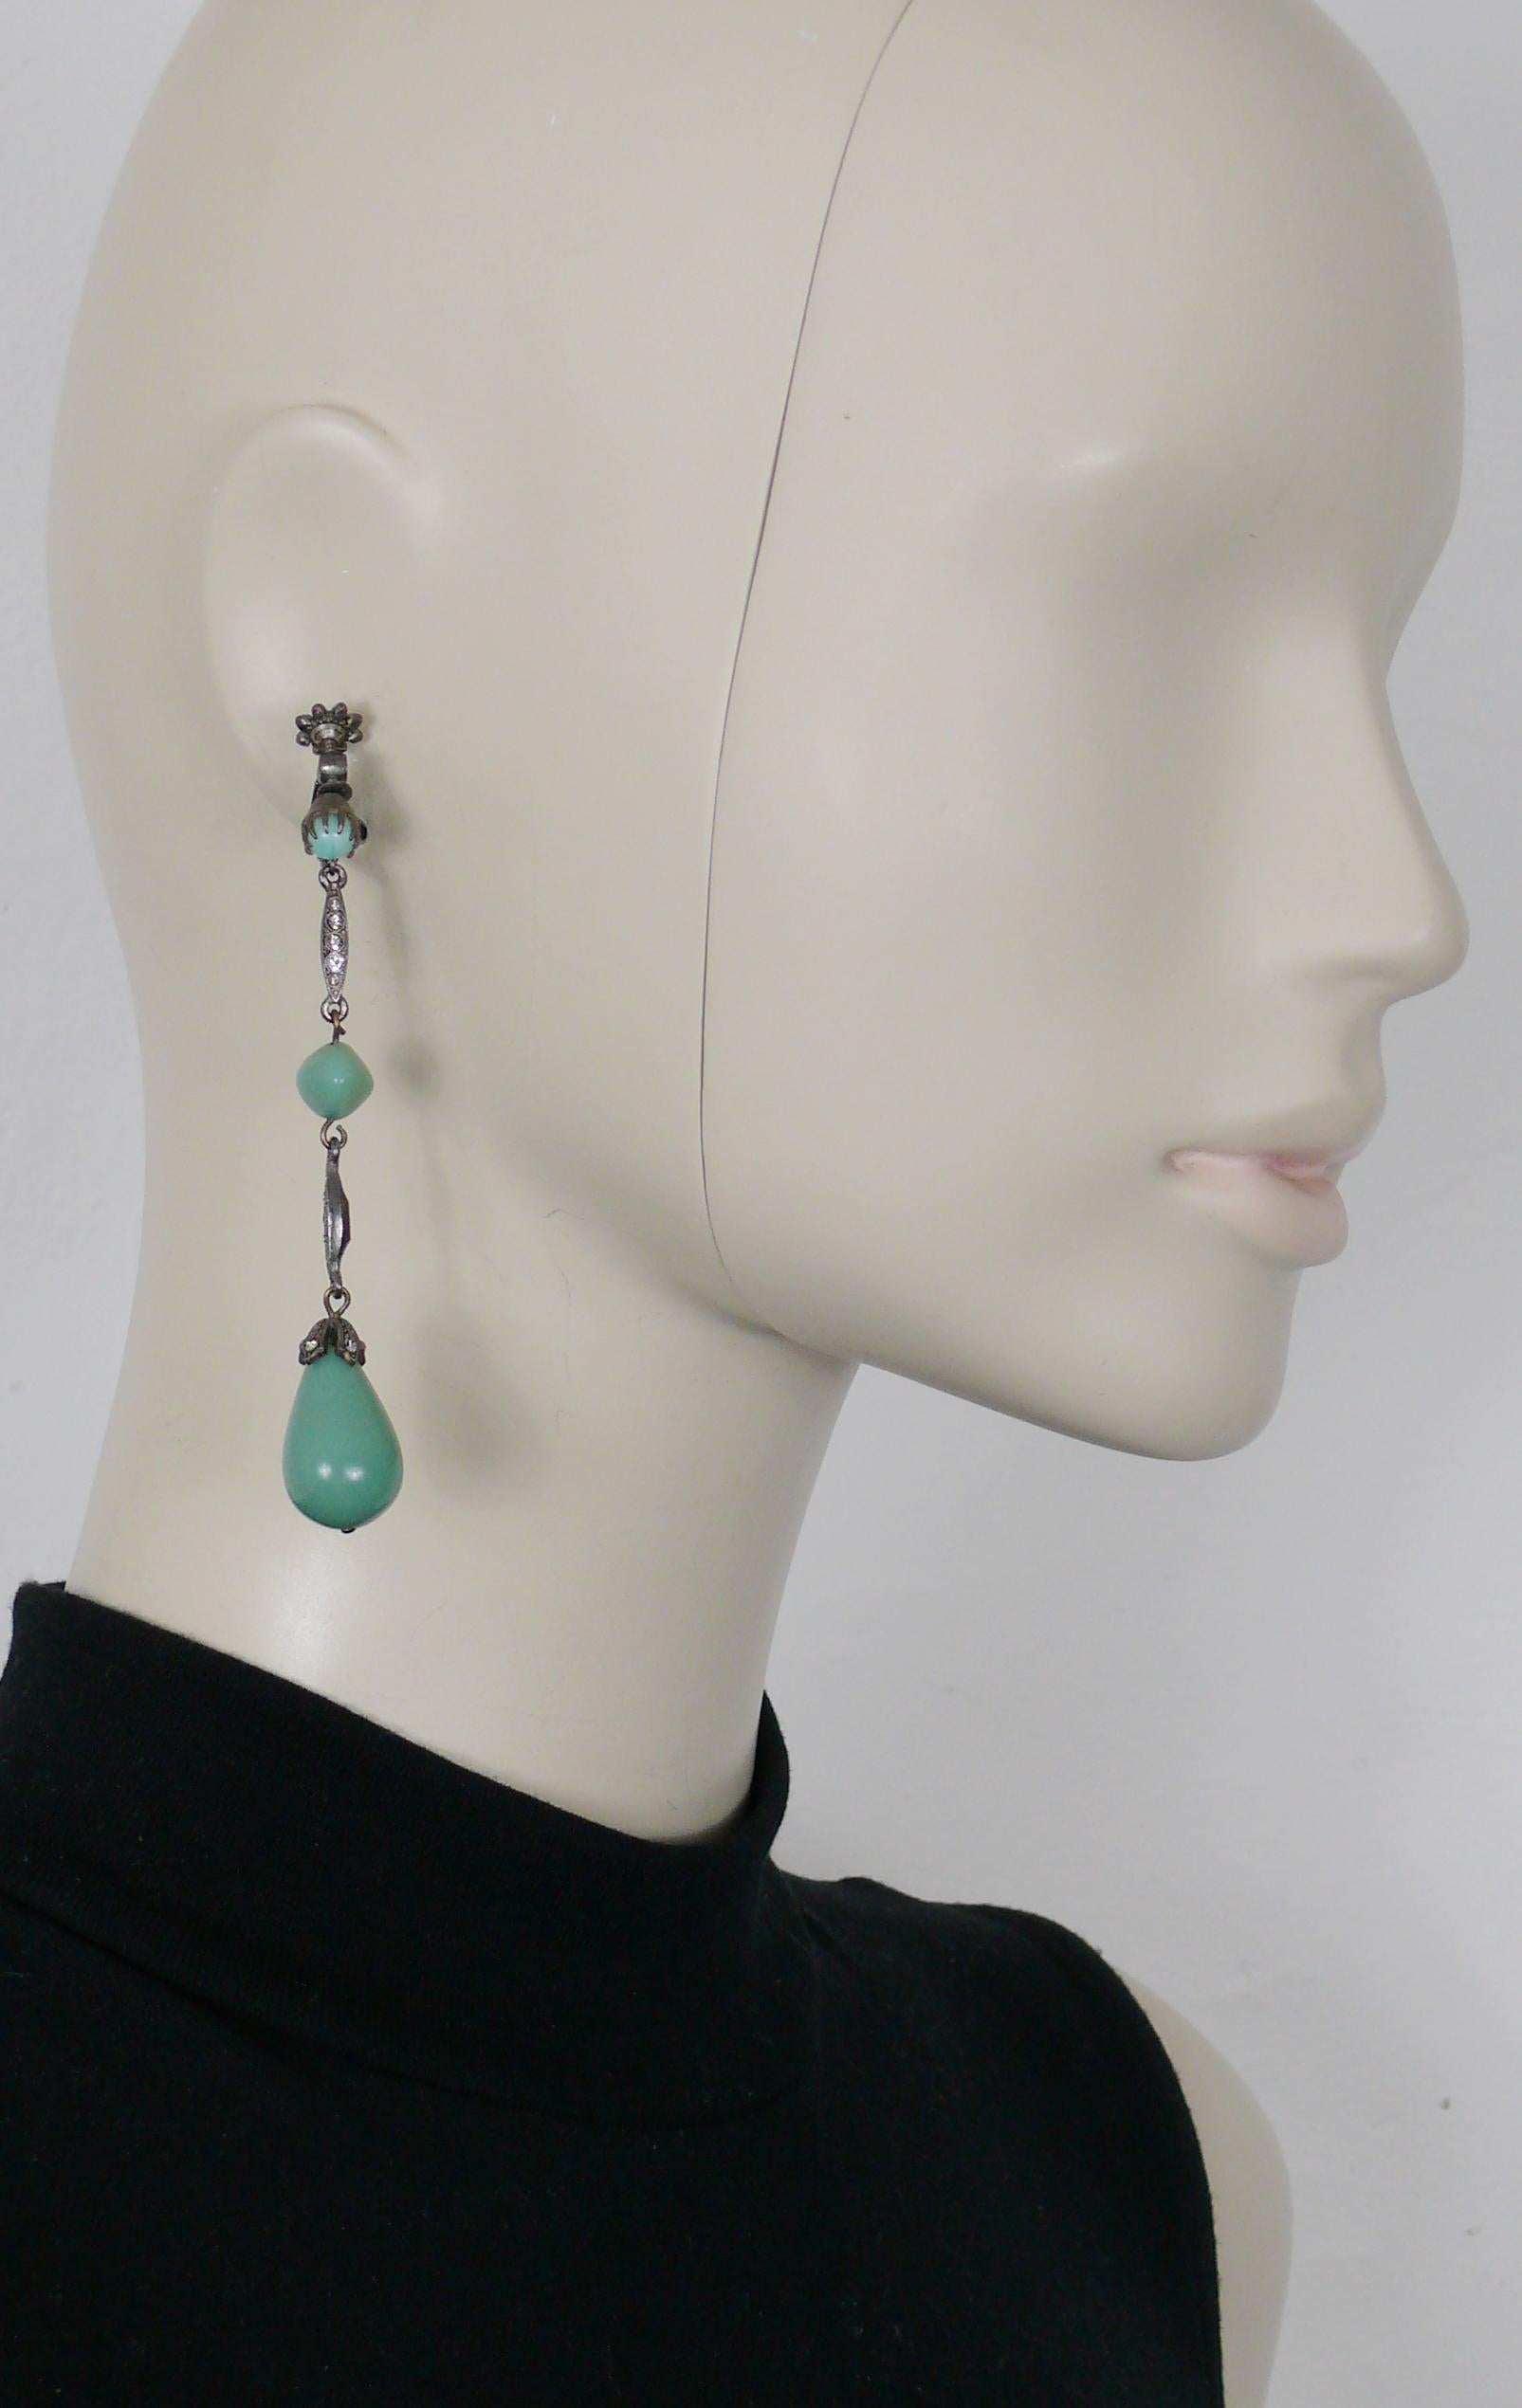 CHRISTIAN DIOR BOUTIQUE by JOHN GALLIANO vintage gun patina dangling earrings (clip-on with screw adjustment device) embellished with clear crystals and faux jade resin beads.

Marked DIOR and BOUTIQUE.

Indicative measurements : height approx. 8.6